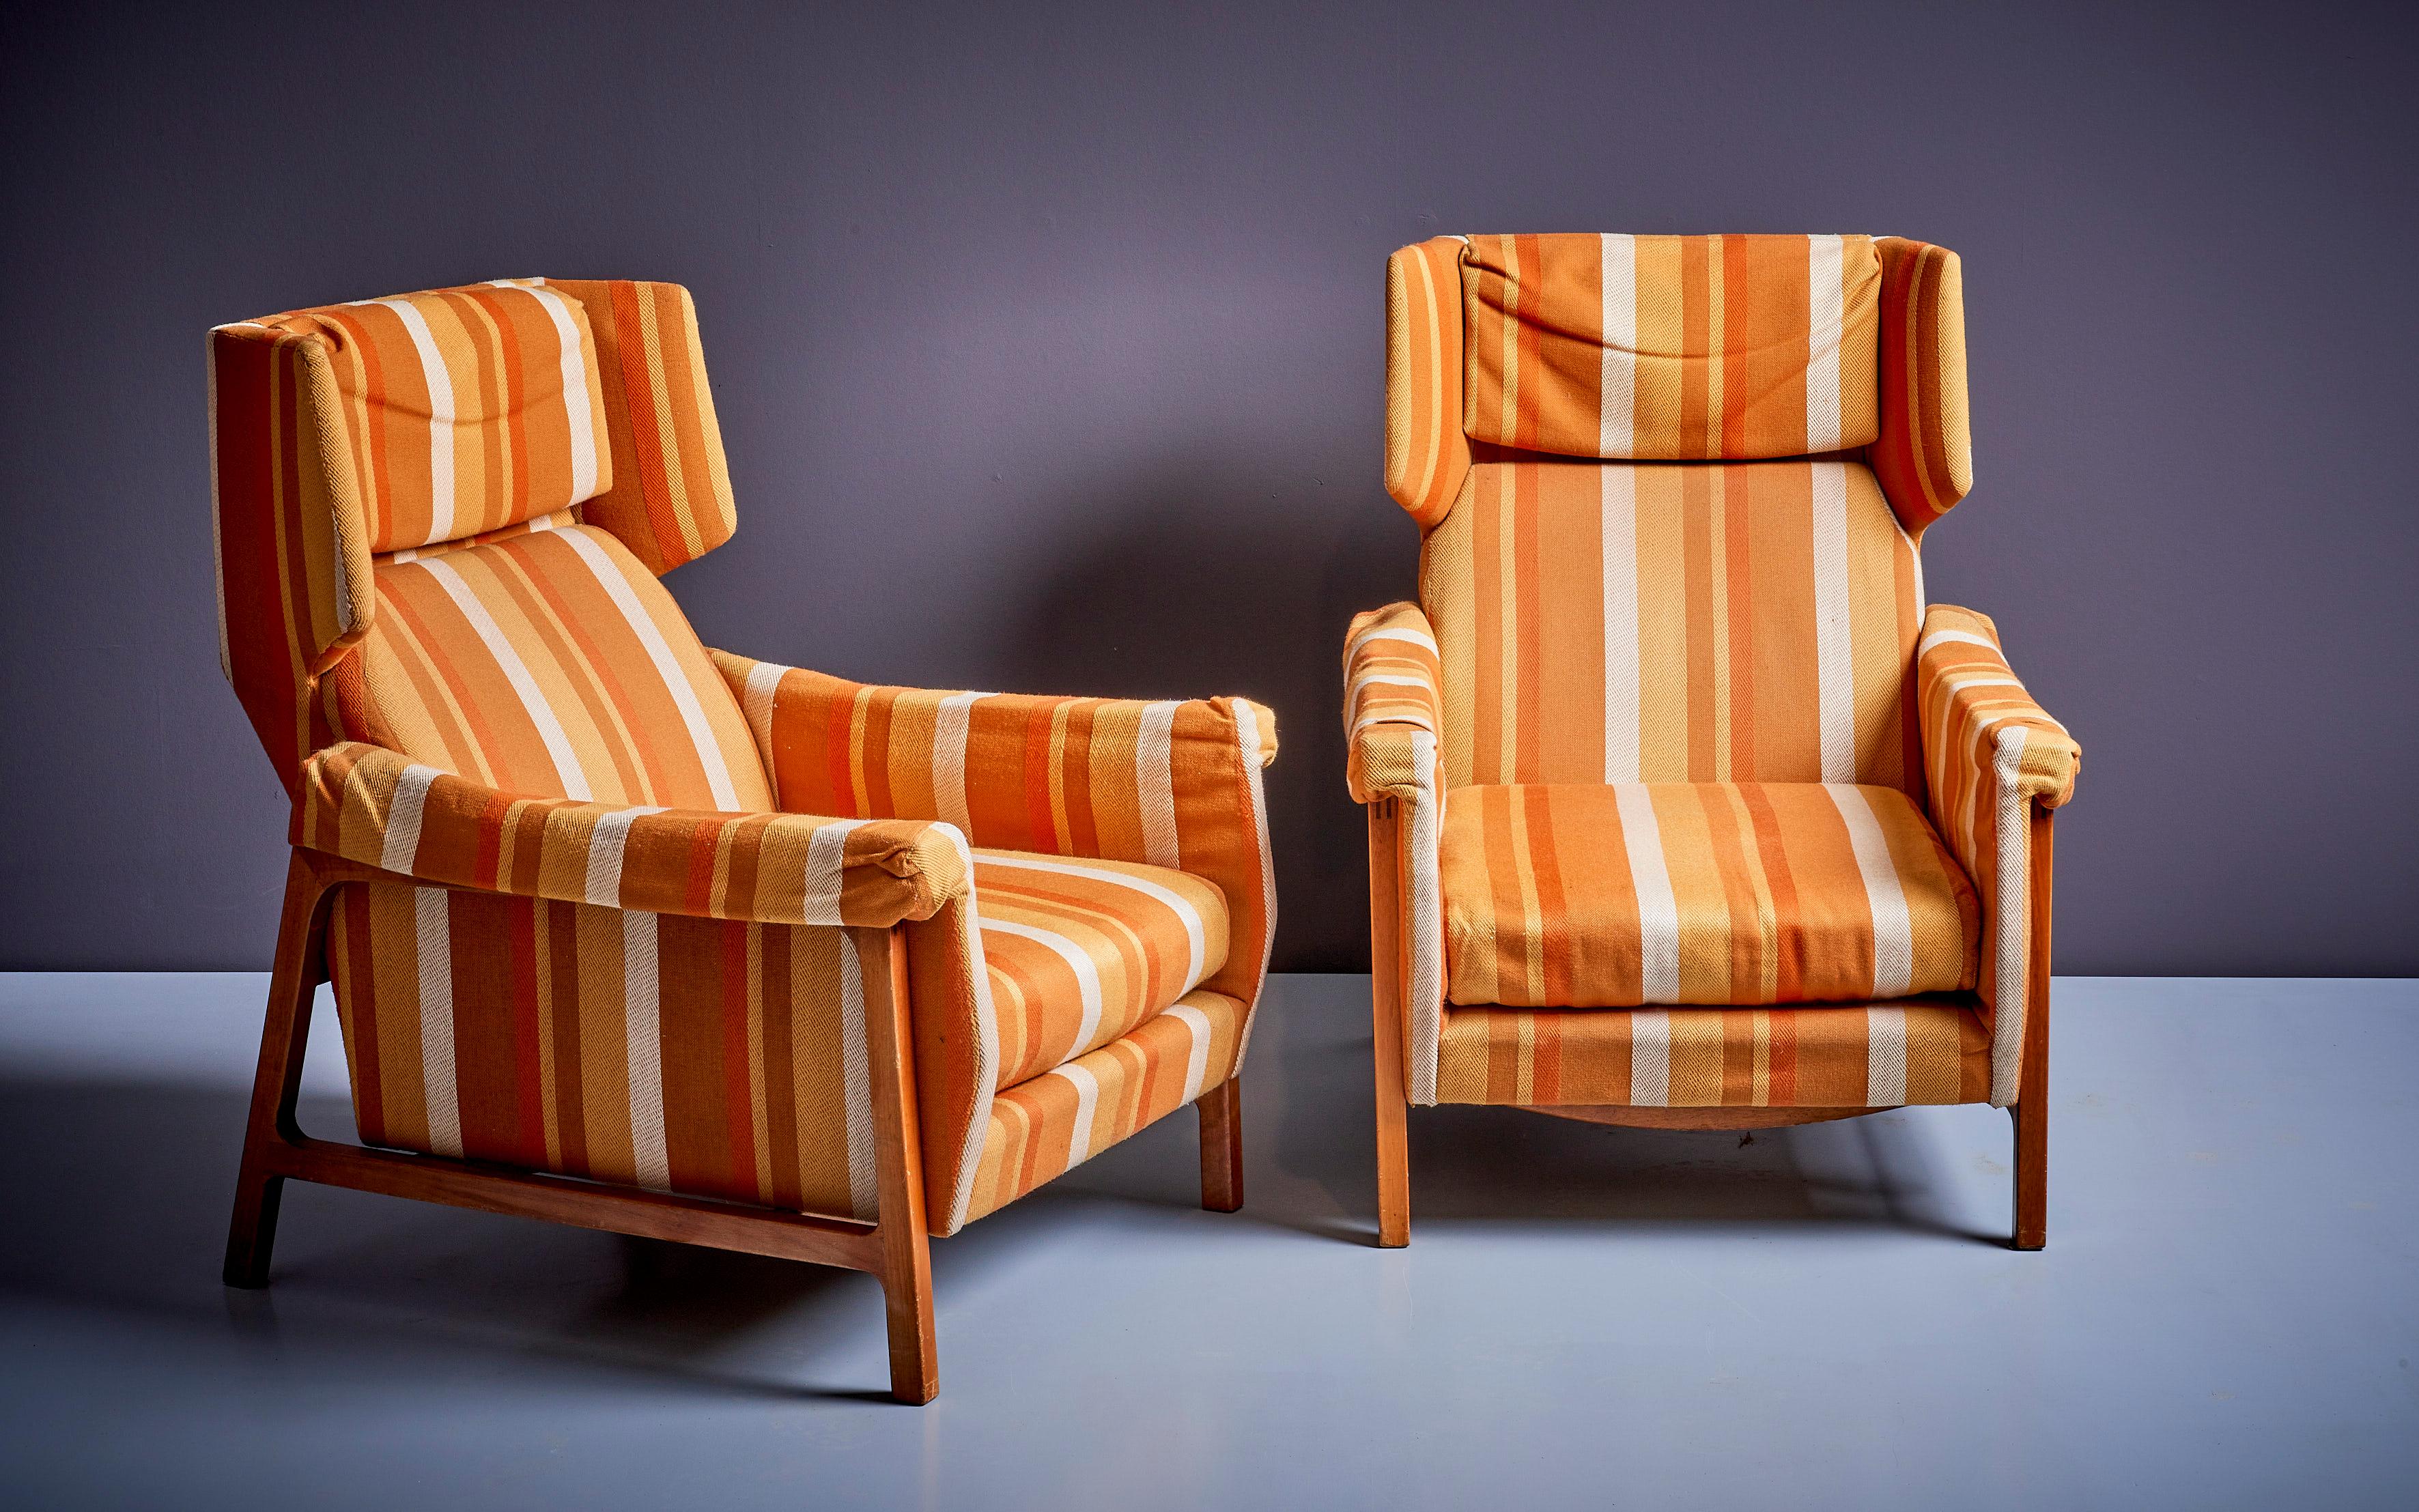 Pair of 2 Original Condition Umberto Colombo & Alberti Reggio Lounge Chairs, Italy - 1950s. We also offer reupholstery in our in-house workshop - please ask for a quote. 